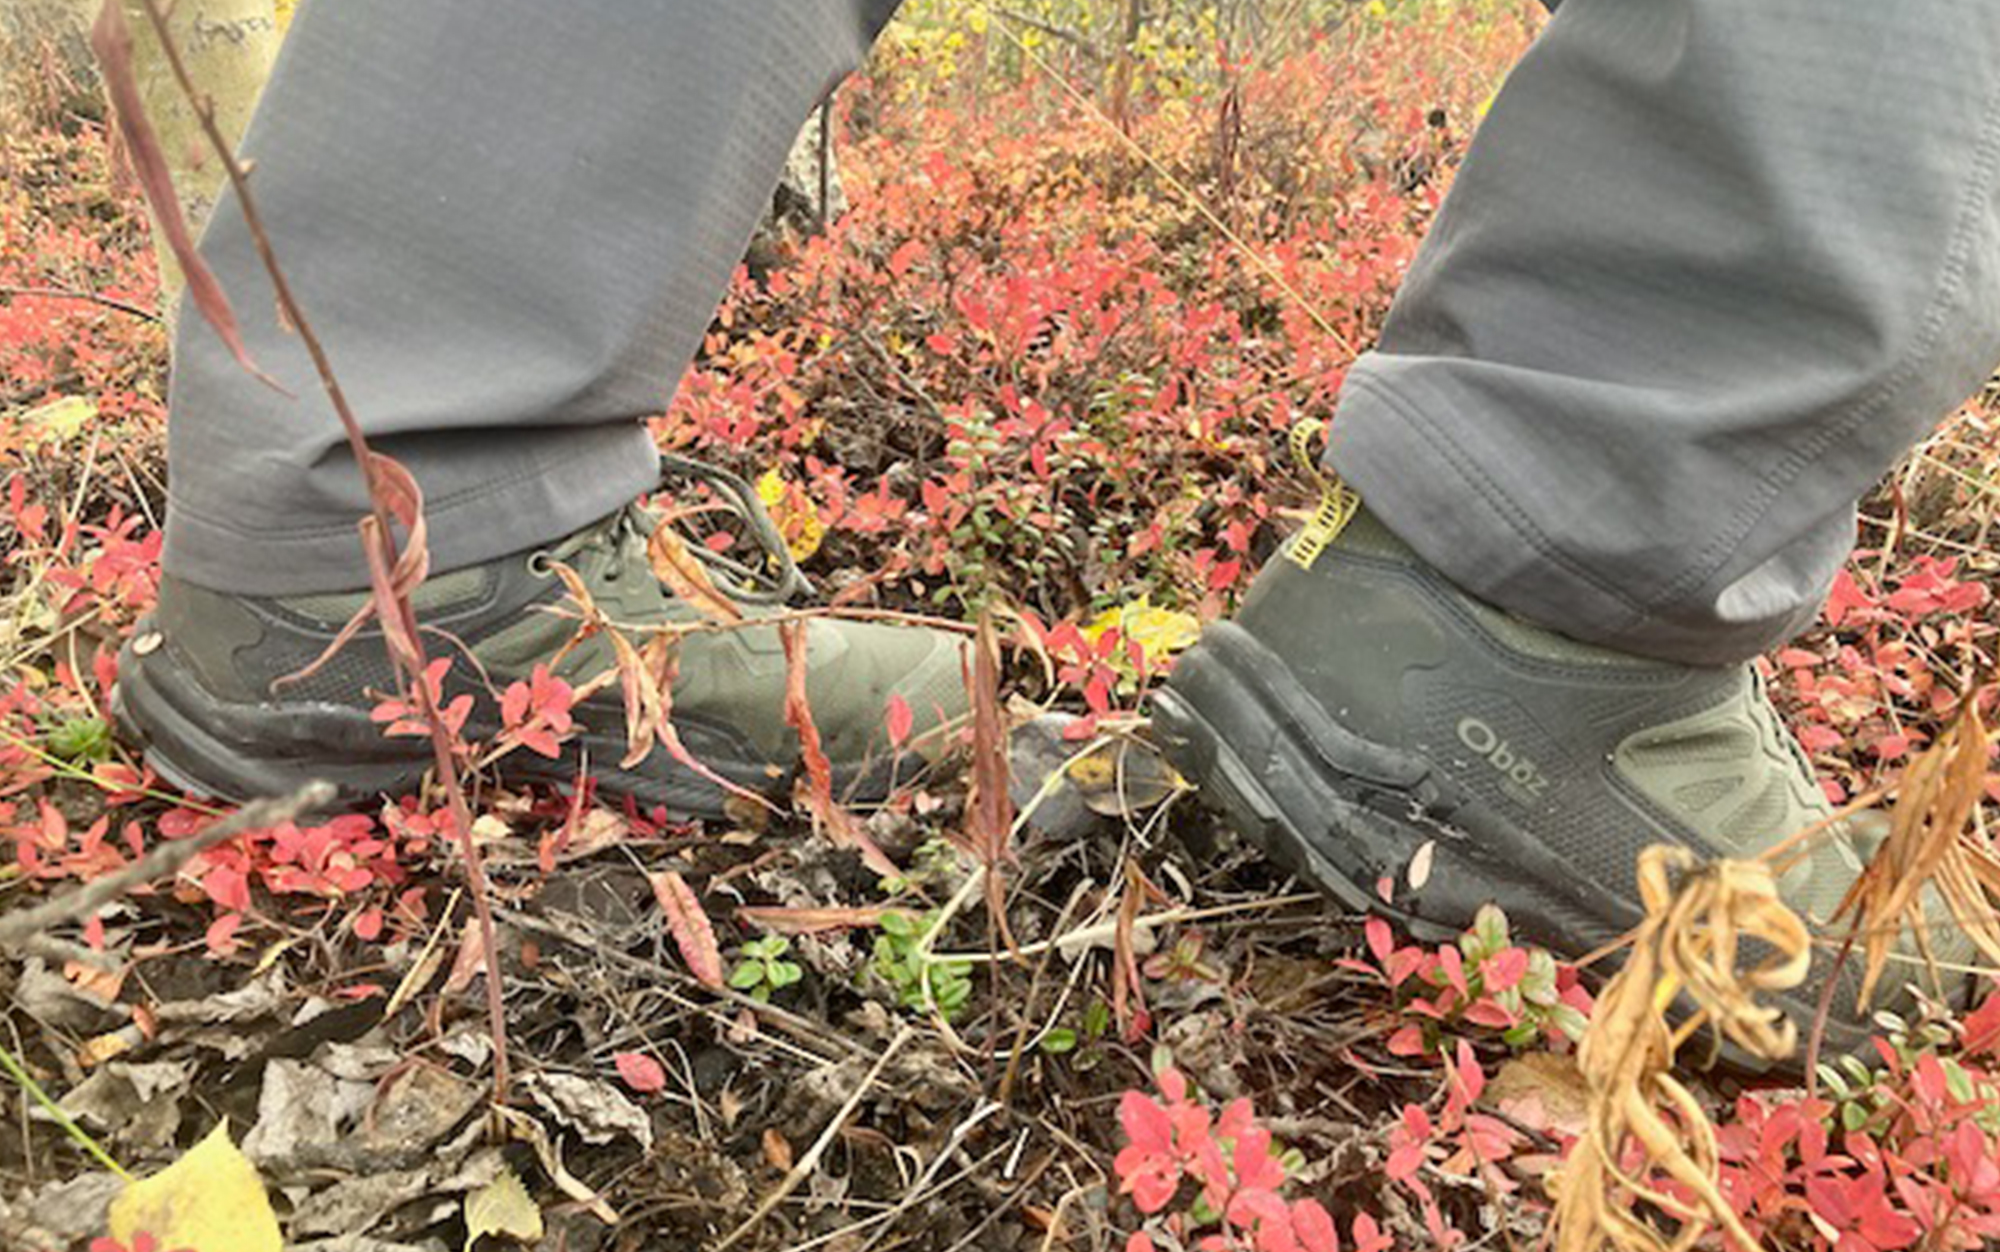 Author wears Oboz lightweight hiking shoes in fall leaves.